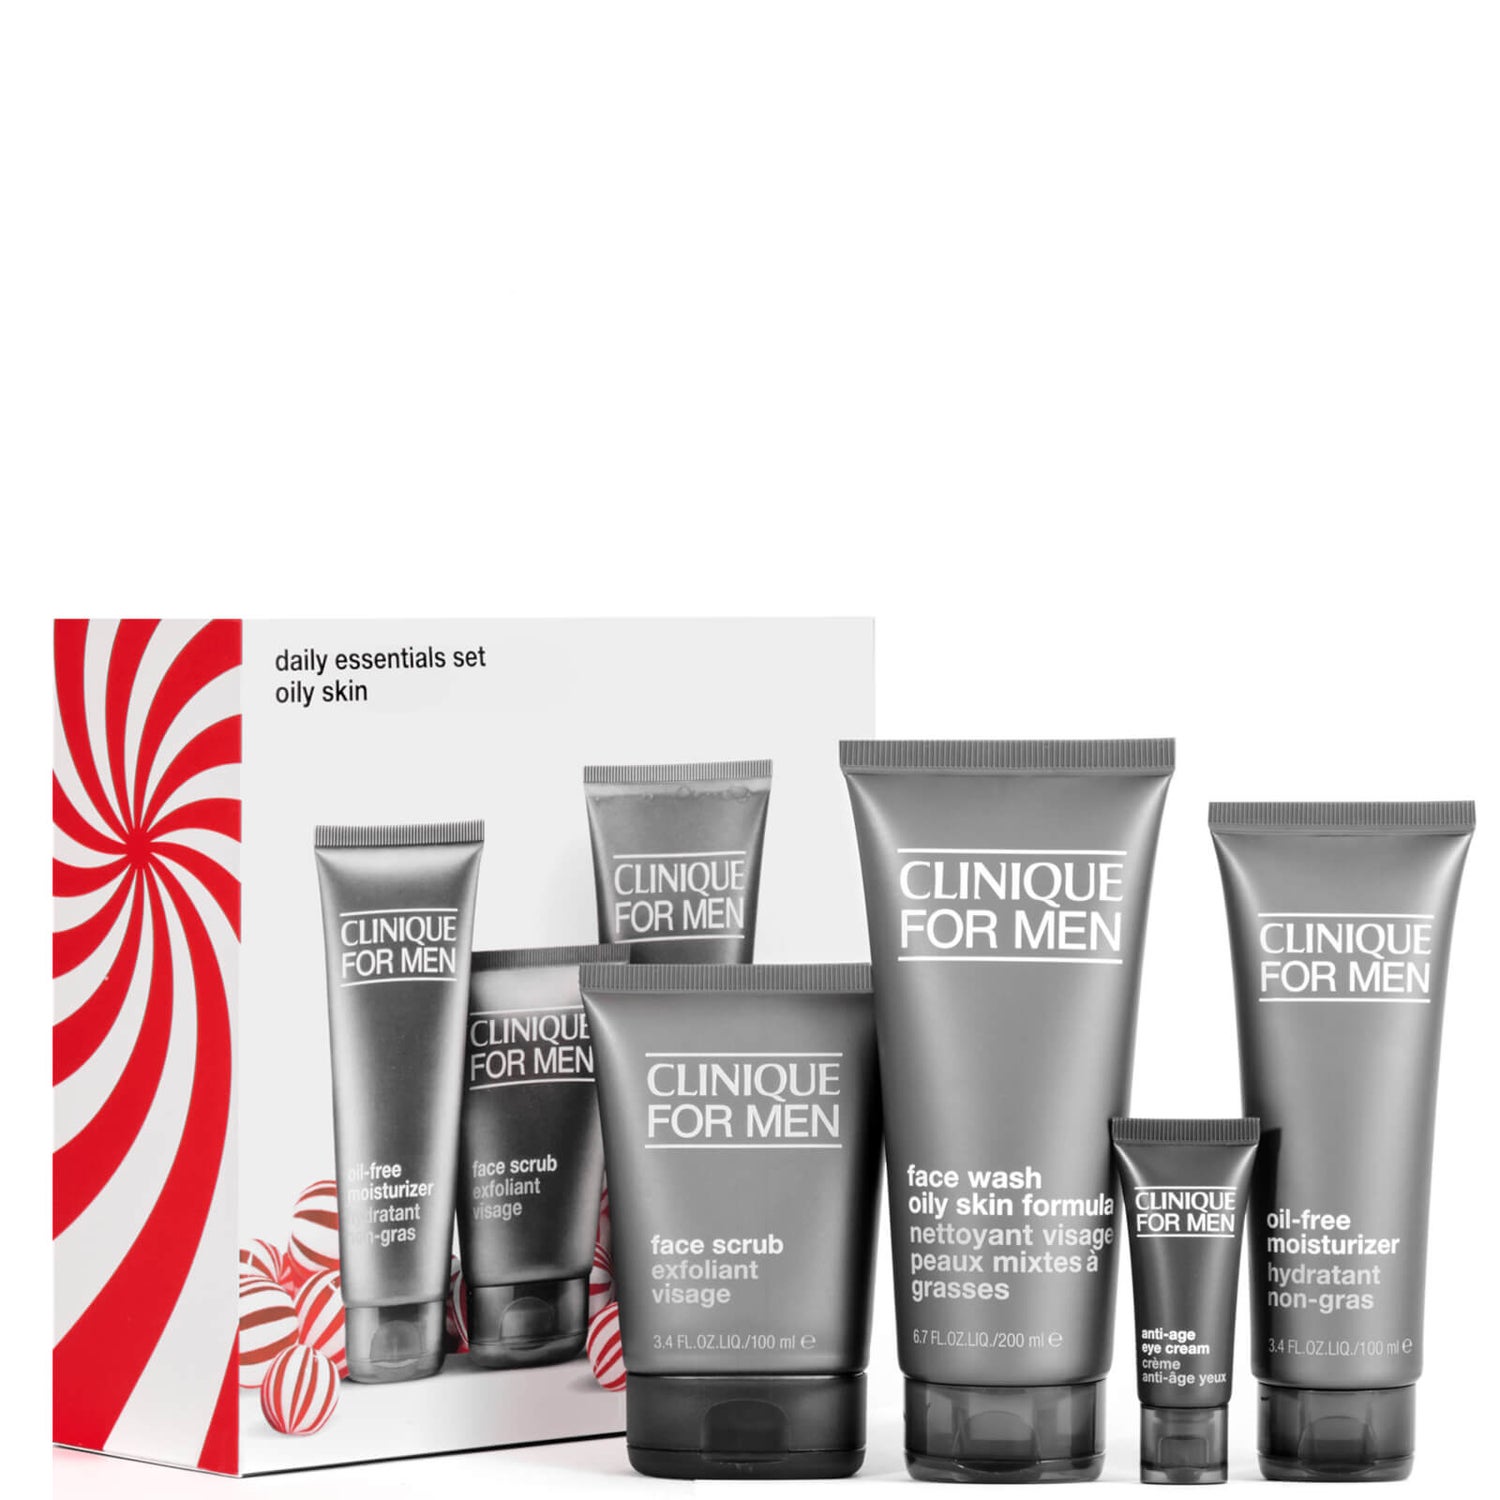 Clinique for Men Daily Essentials Set for Oily Skin (Worth £93.50)